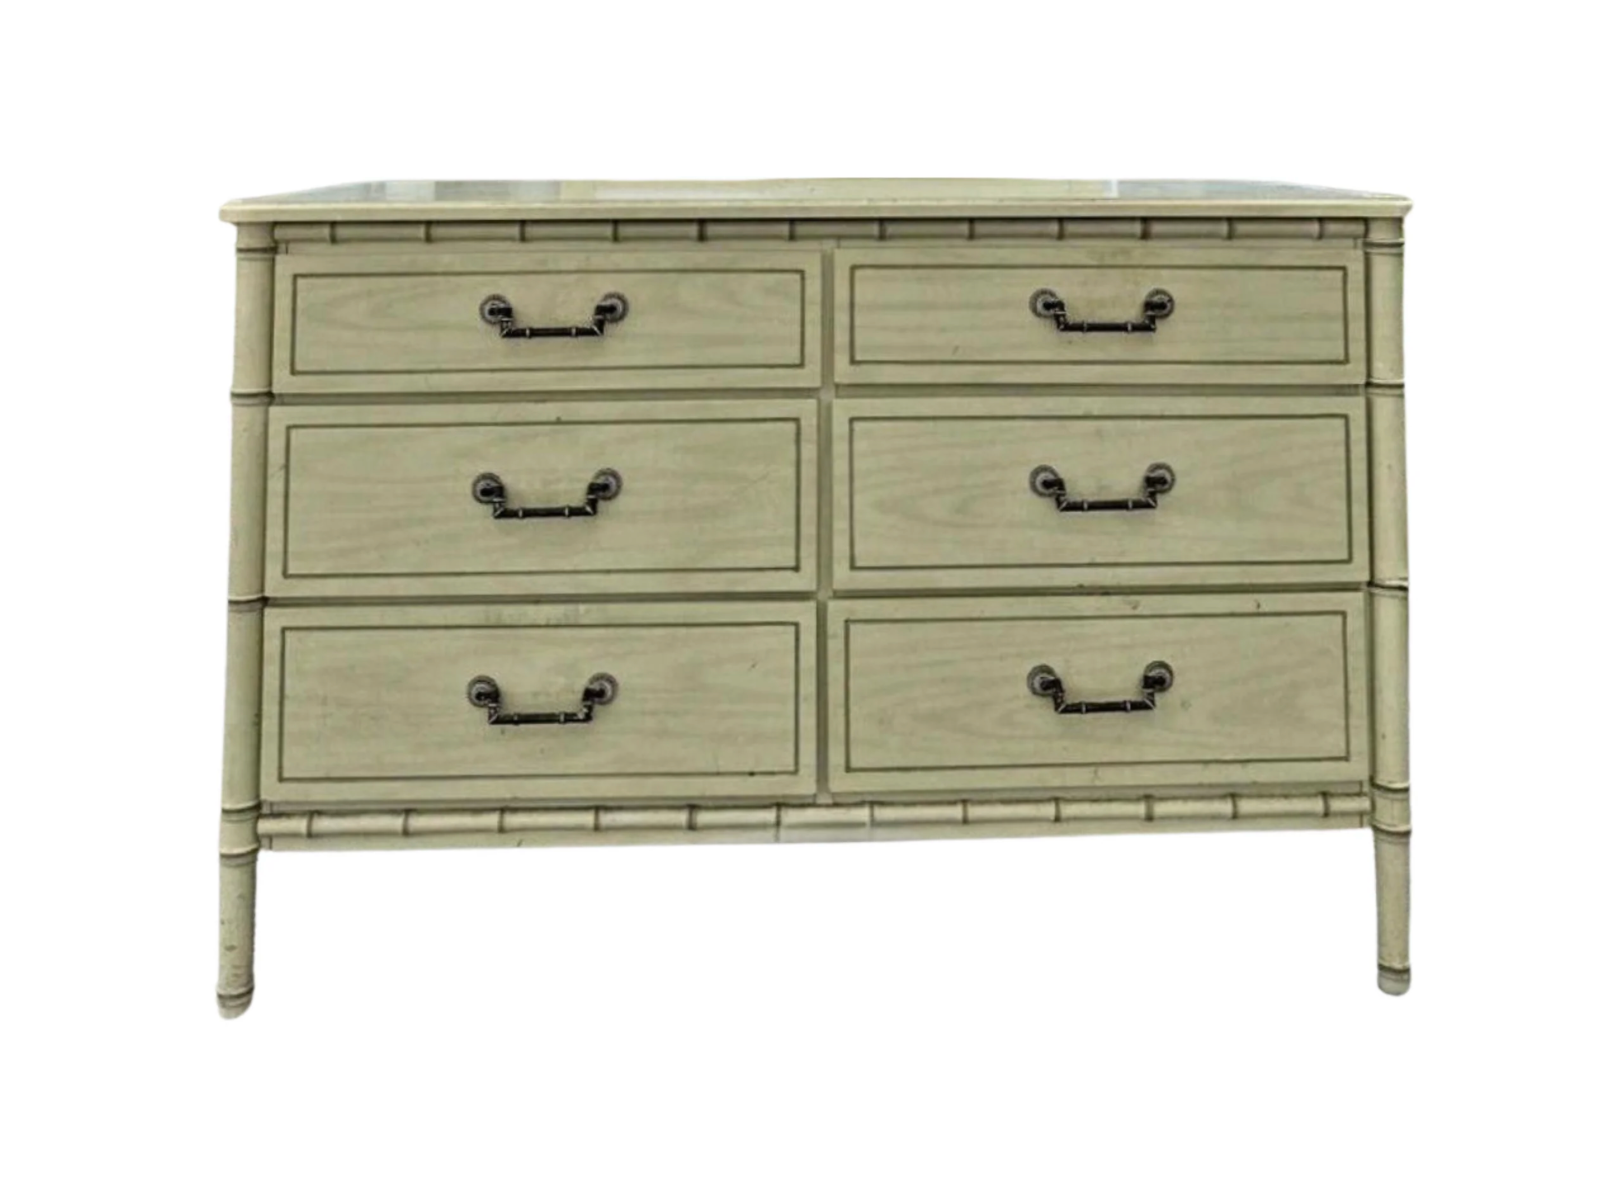 Vintage Classic Six-Drawer Faux Bamboo Double Dresser Available for Lacquer for Customization!